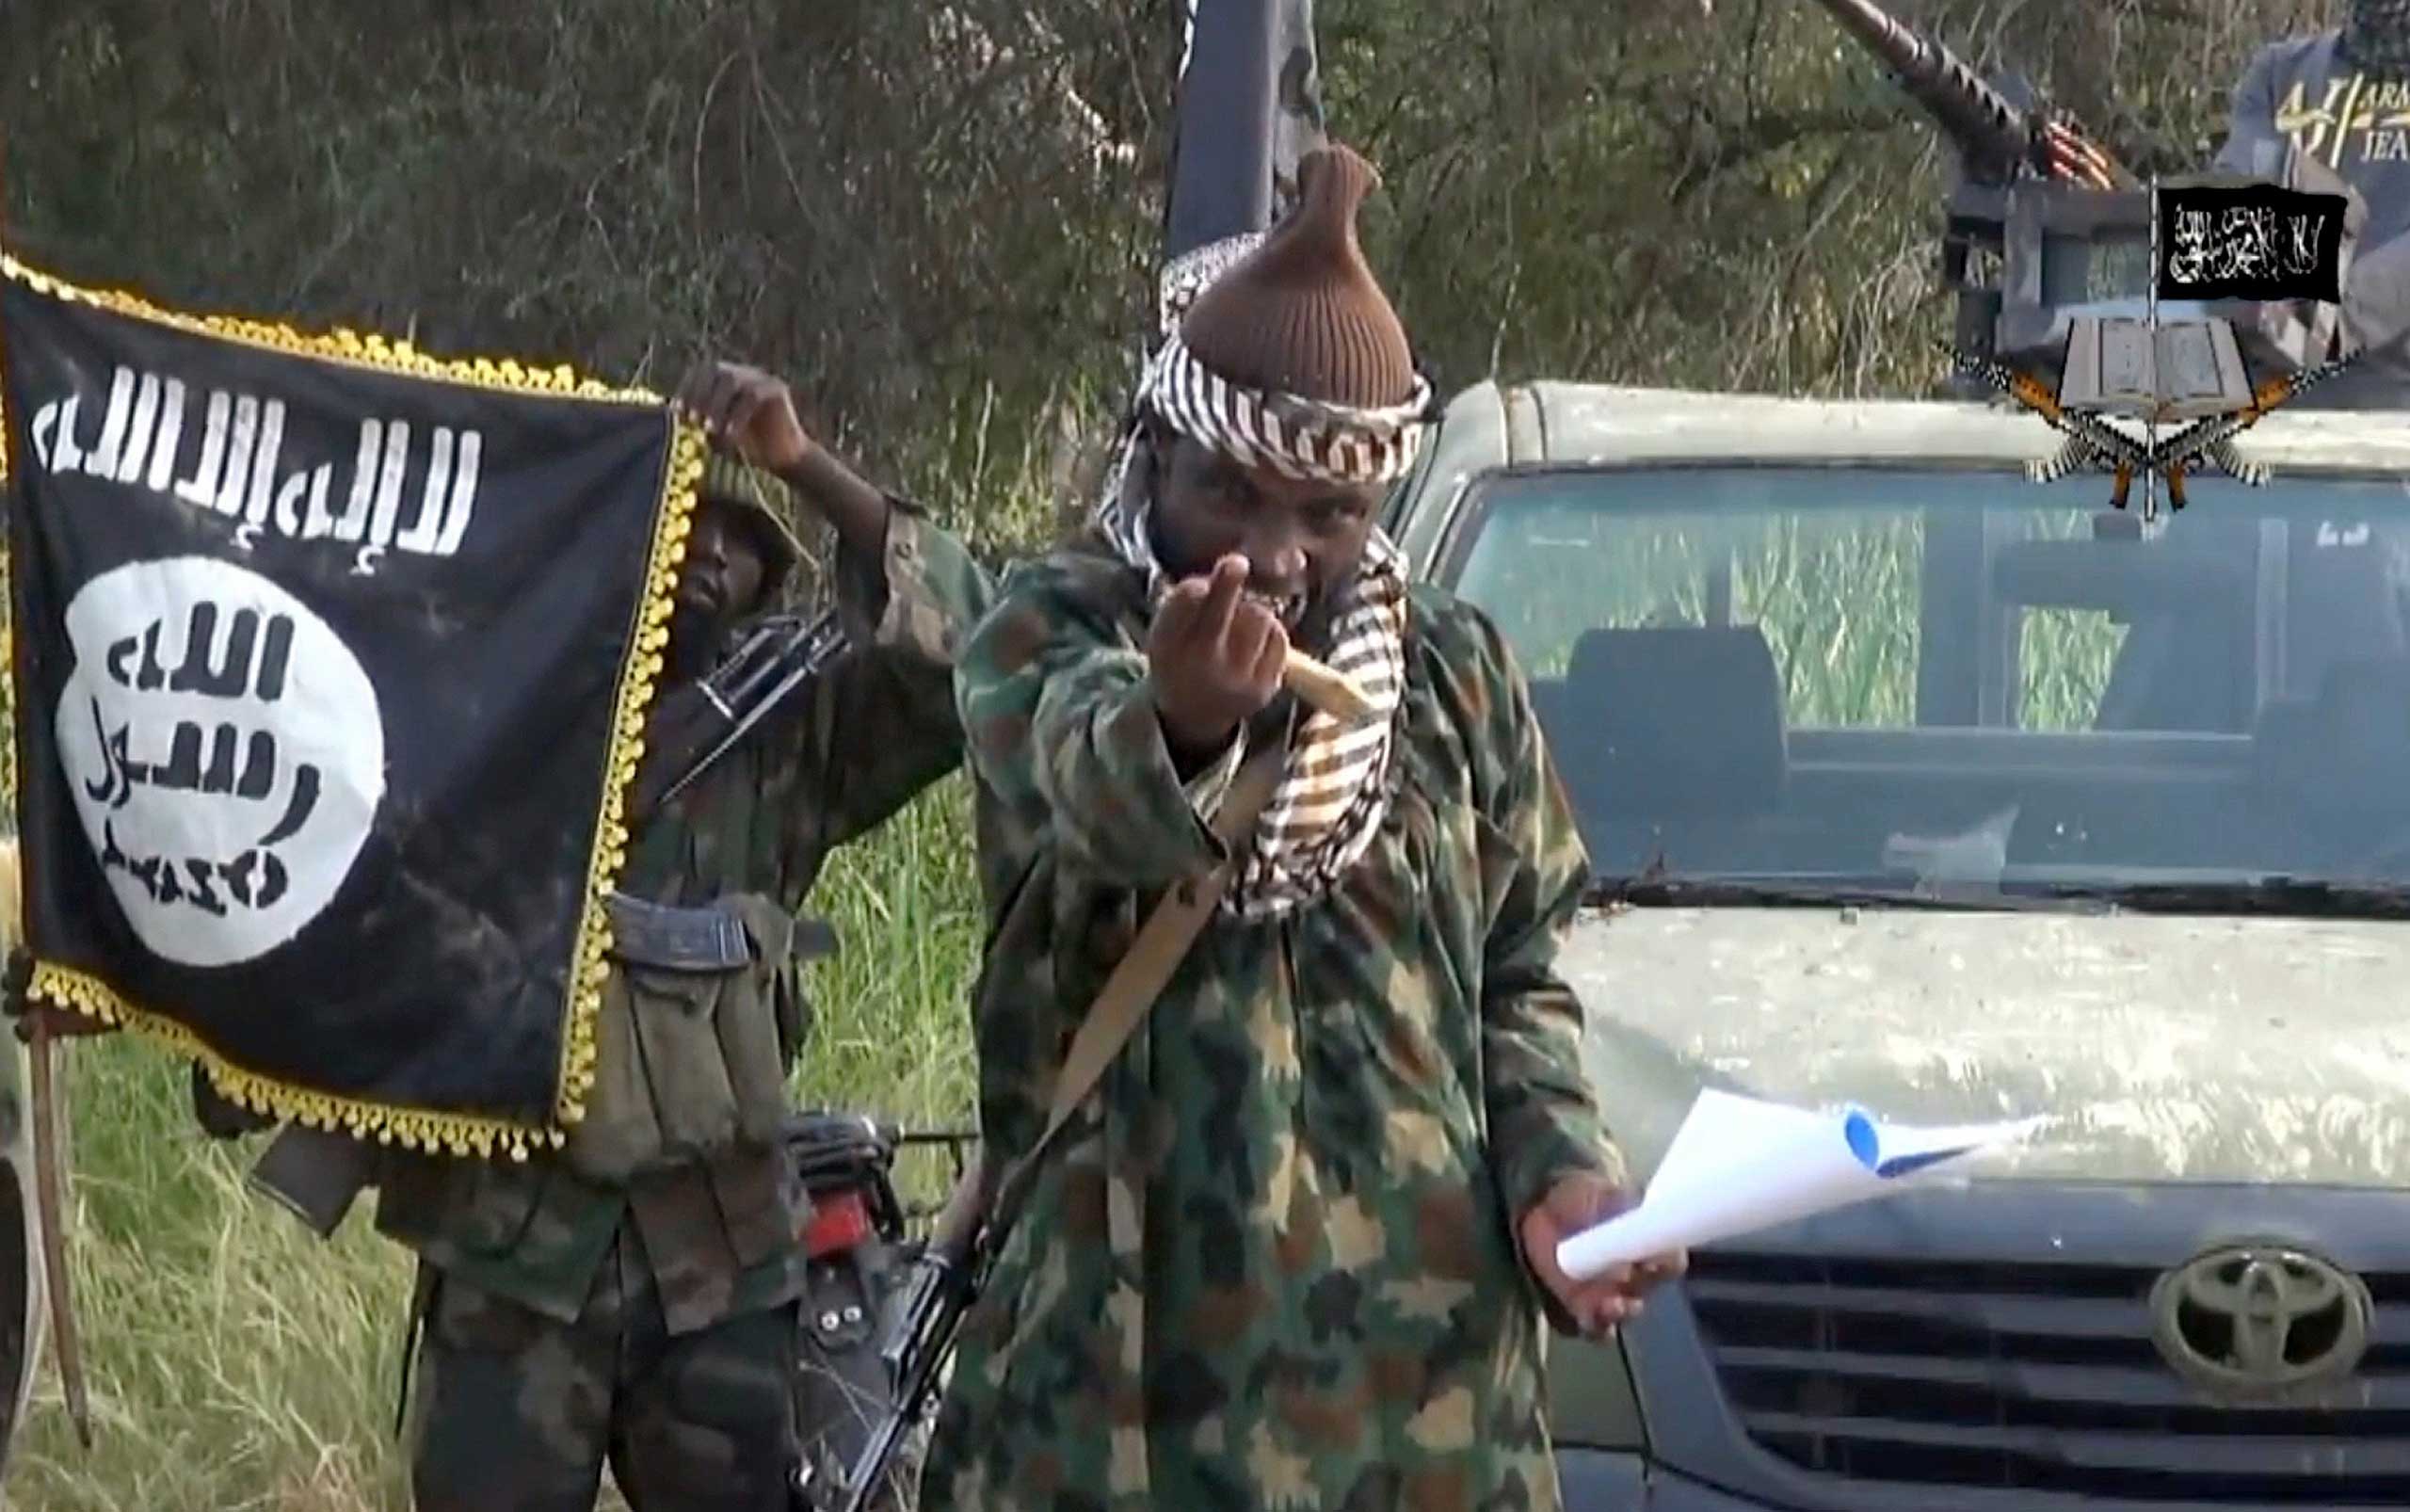 Screengrab taken on Oct. 2, 2014 from a video released by the Nigerian Islamist extremist group Boko Haram, shows group's leader Abubakar Shekau. (AFP/Getty Images)